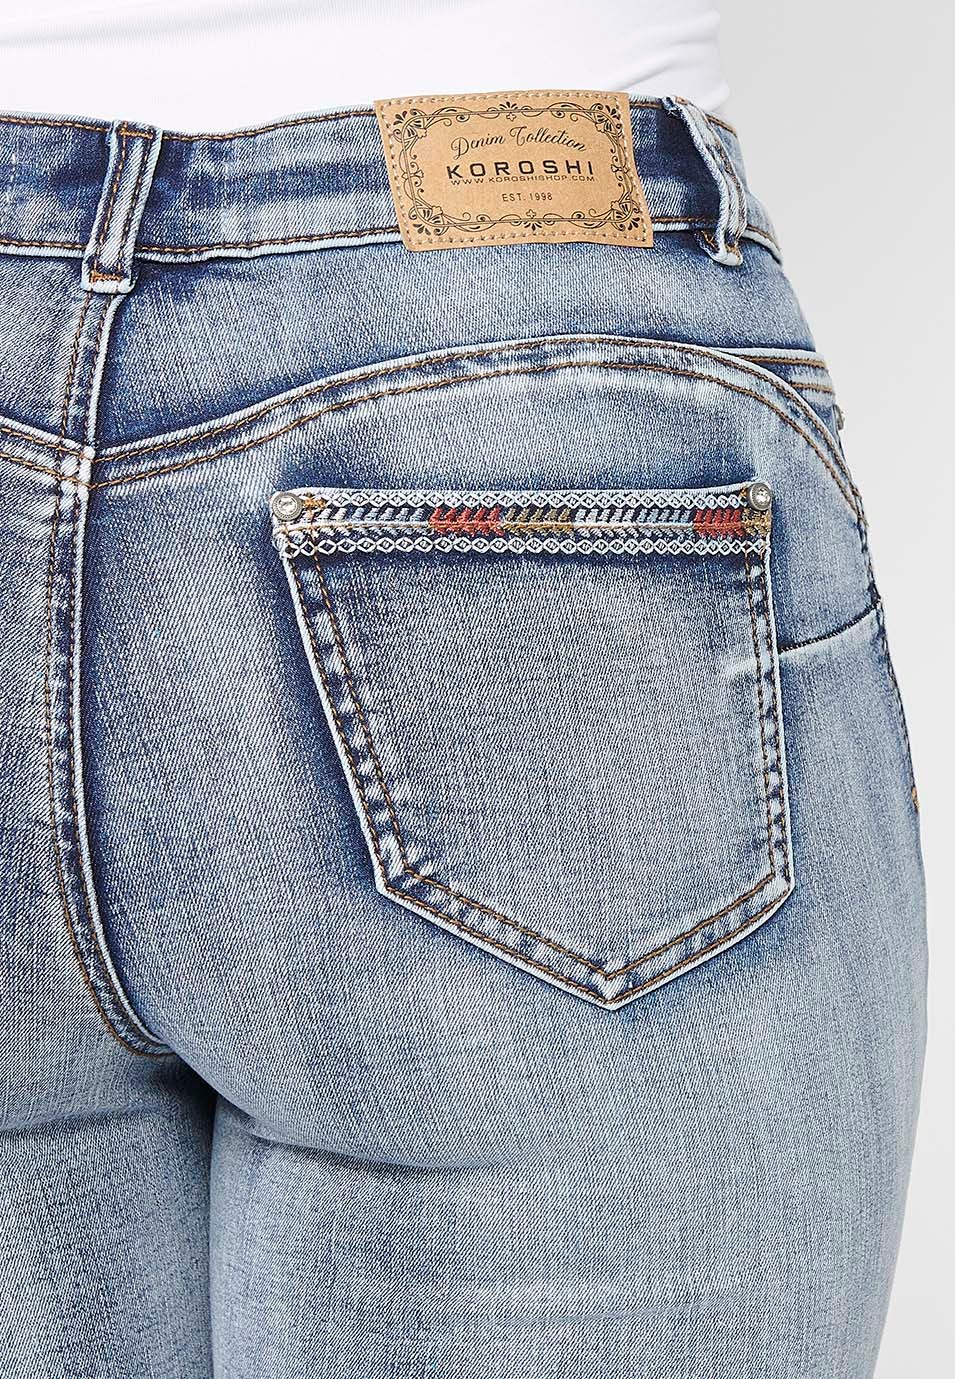 Pirate denim pants with embroidered details and worn effect in light blue for women